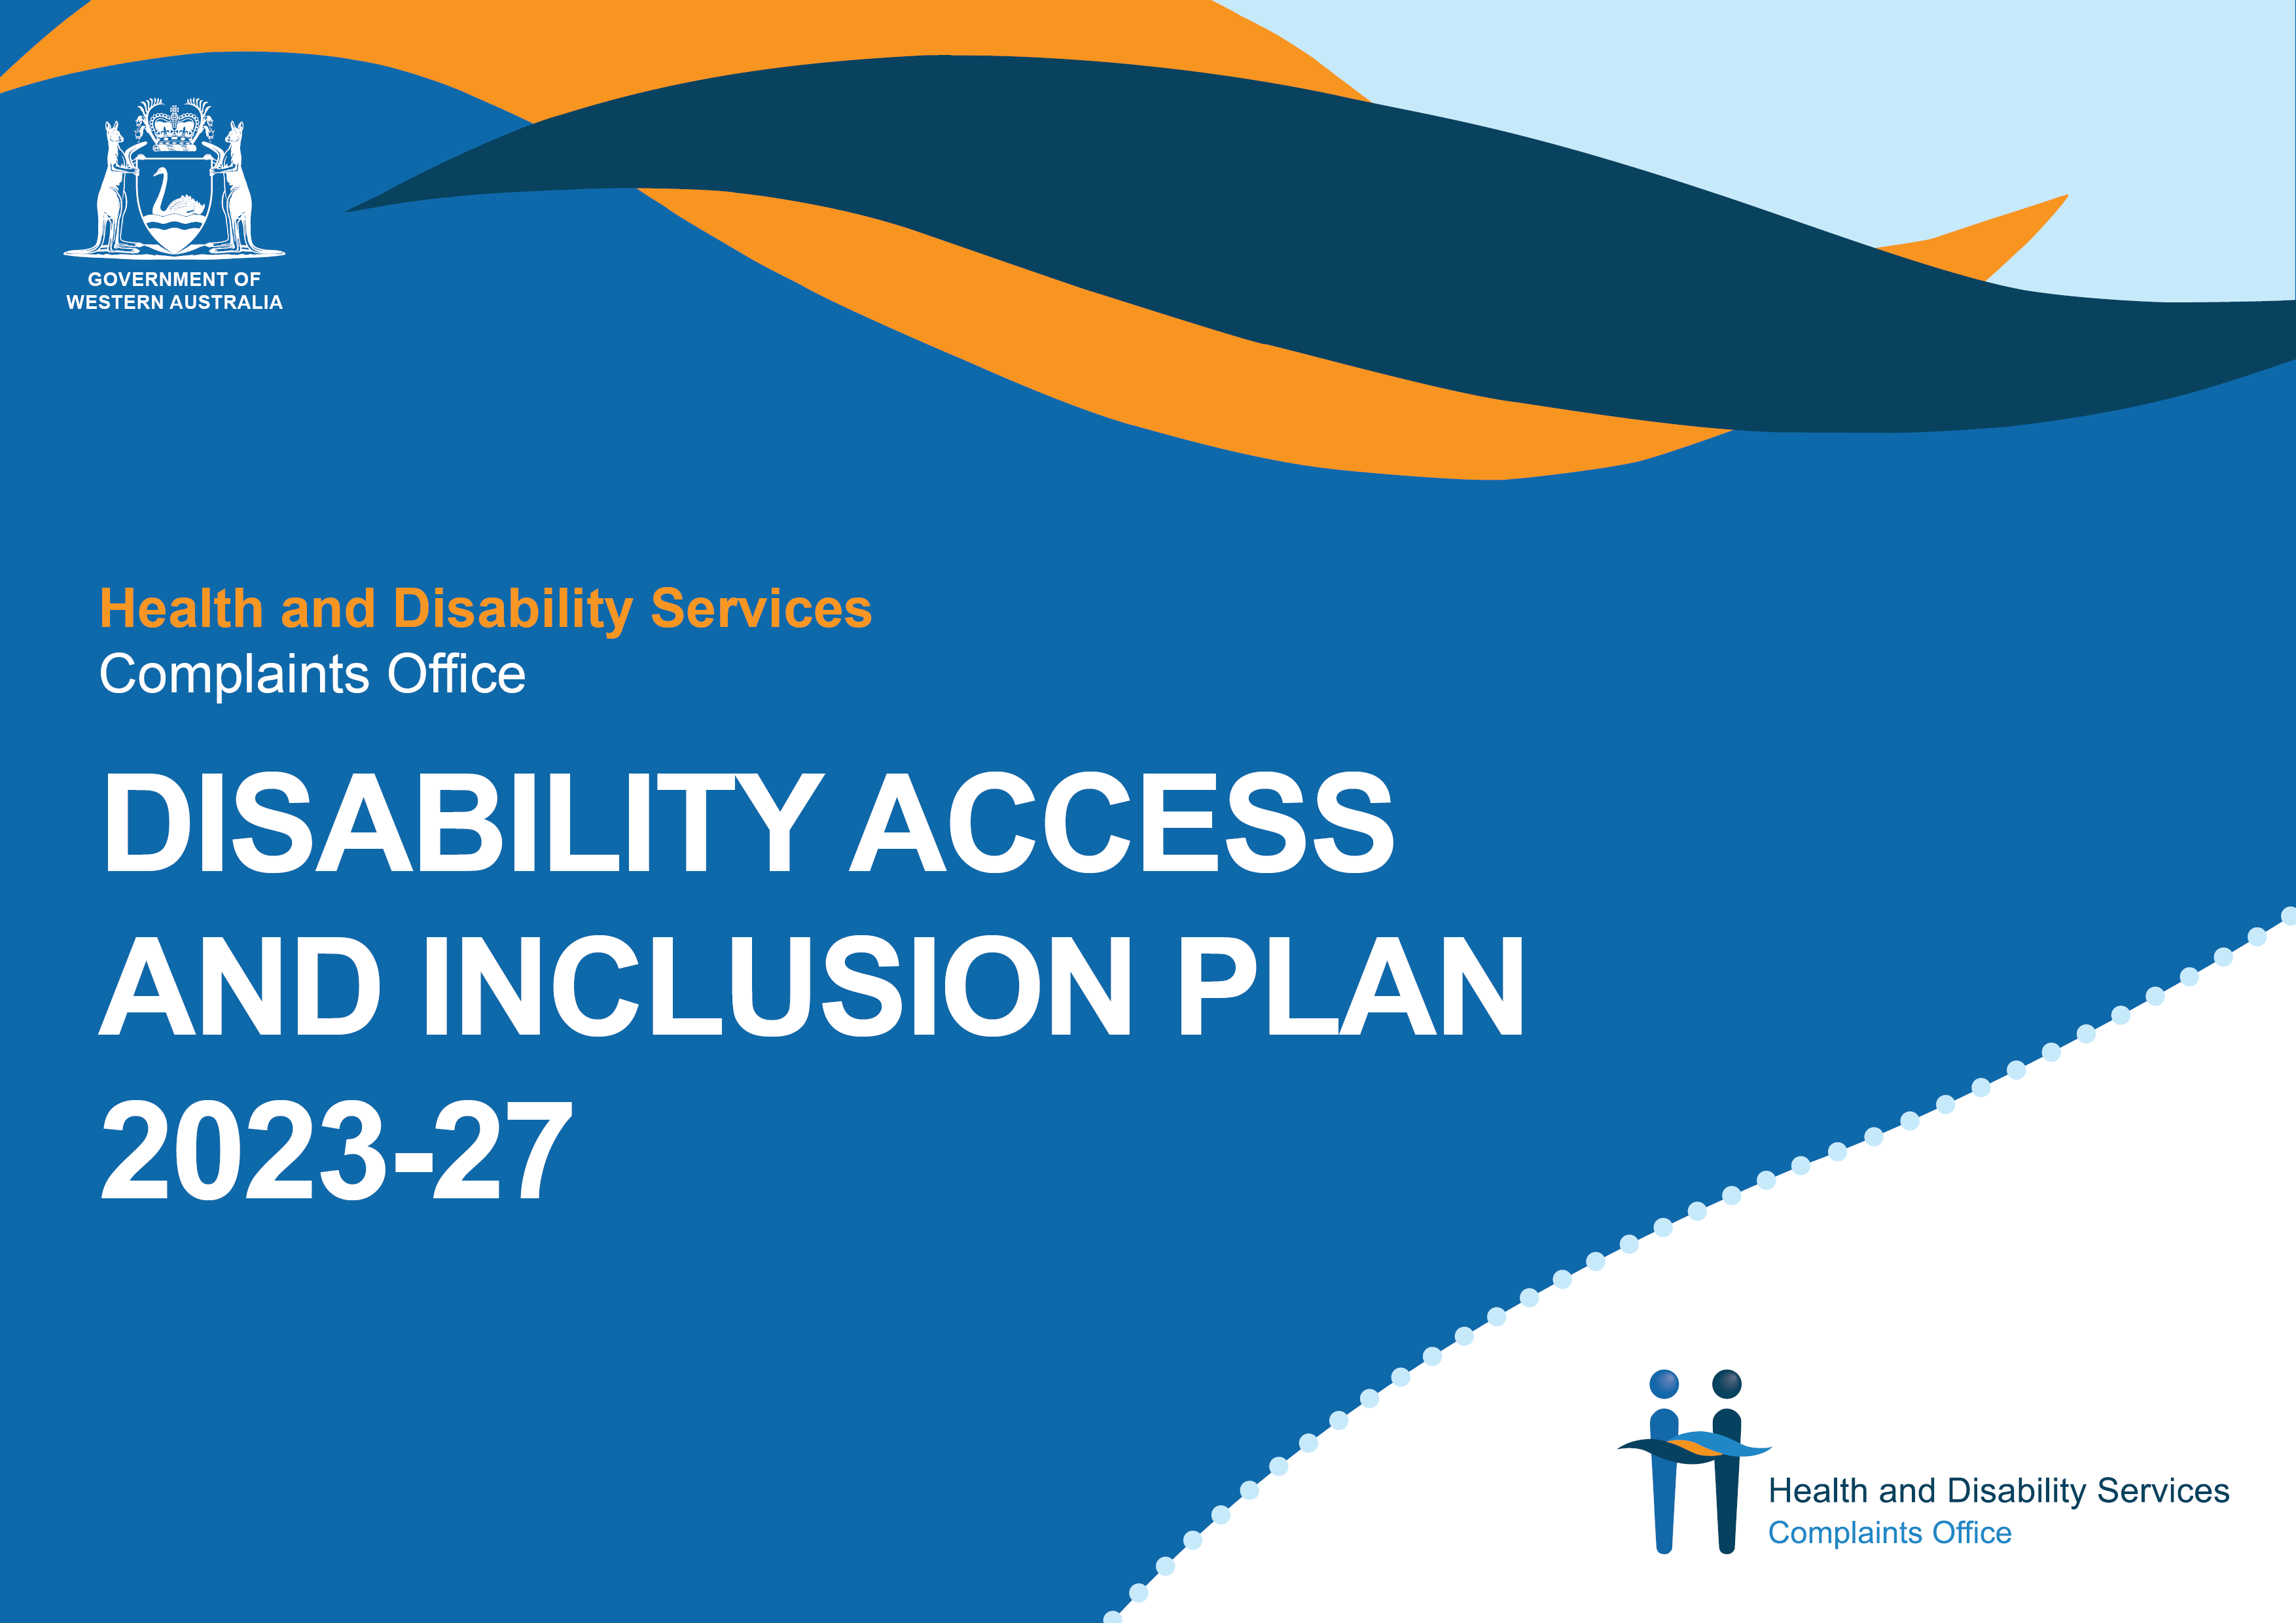 Disability Access and Inclusion Plan 2023-27